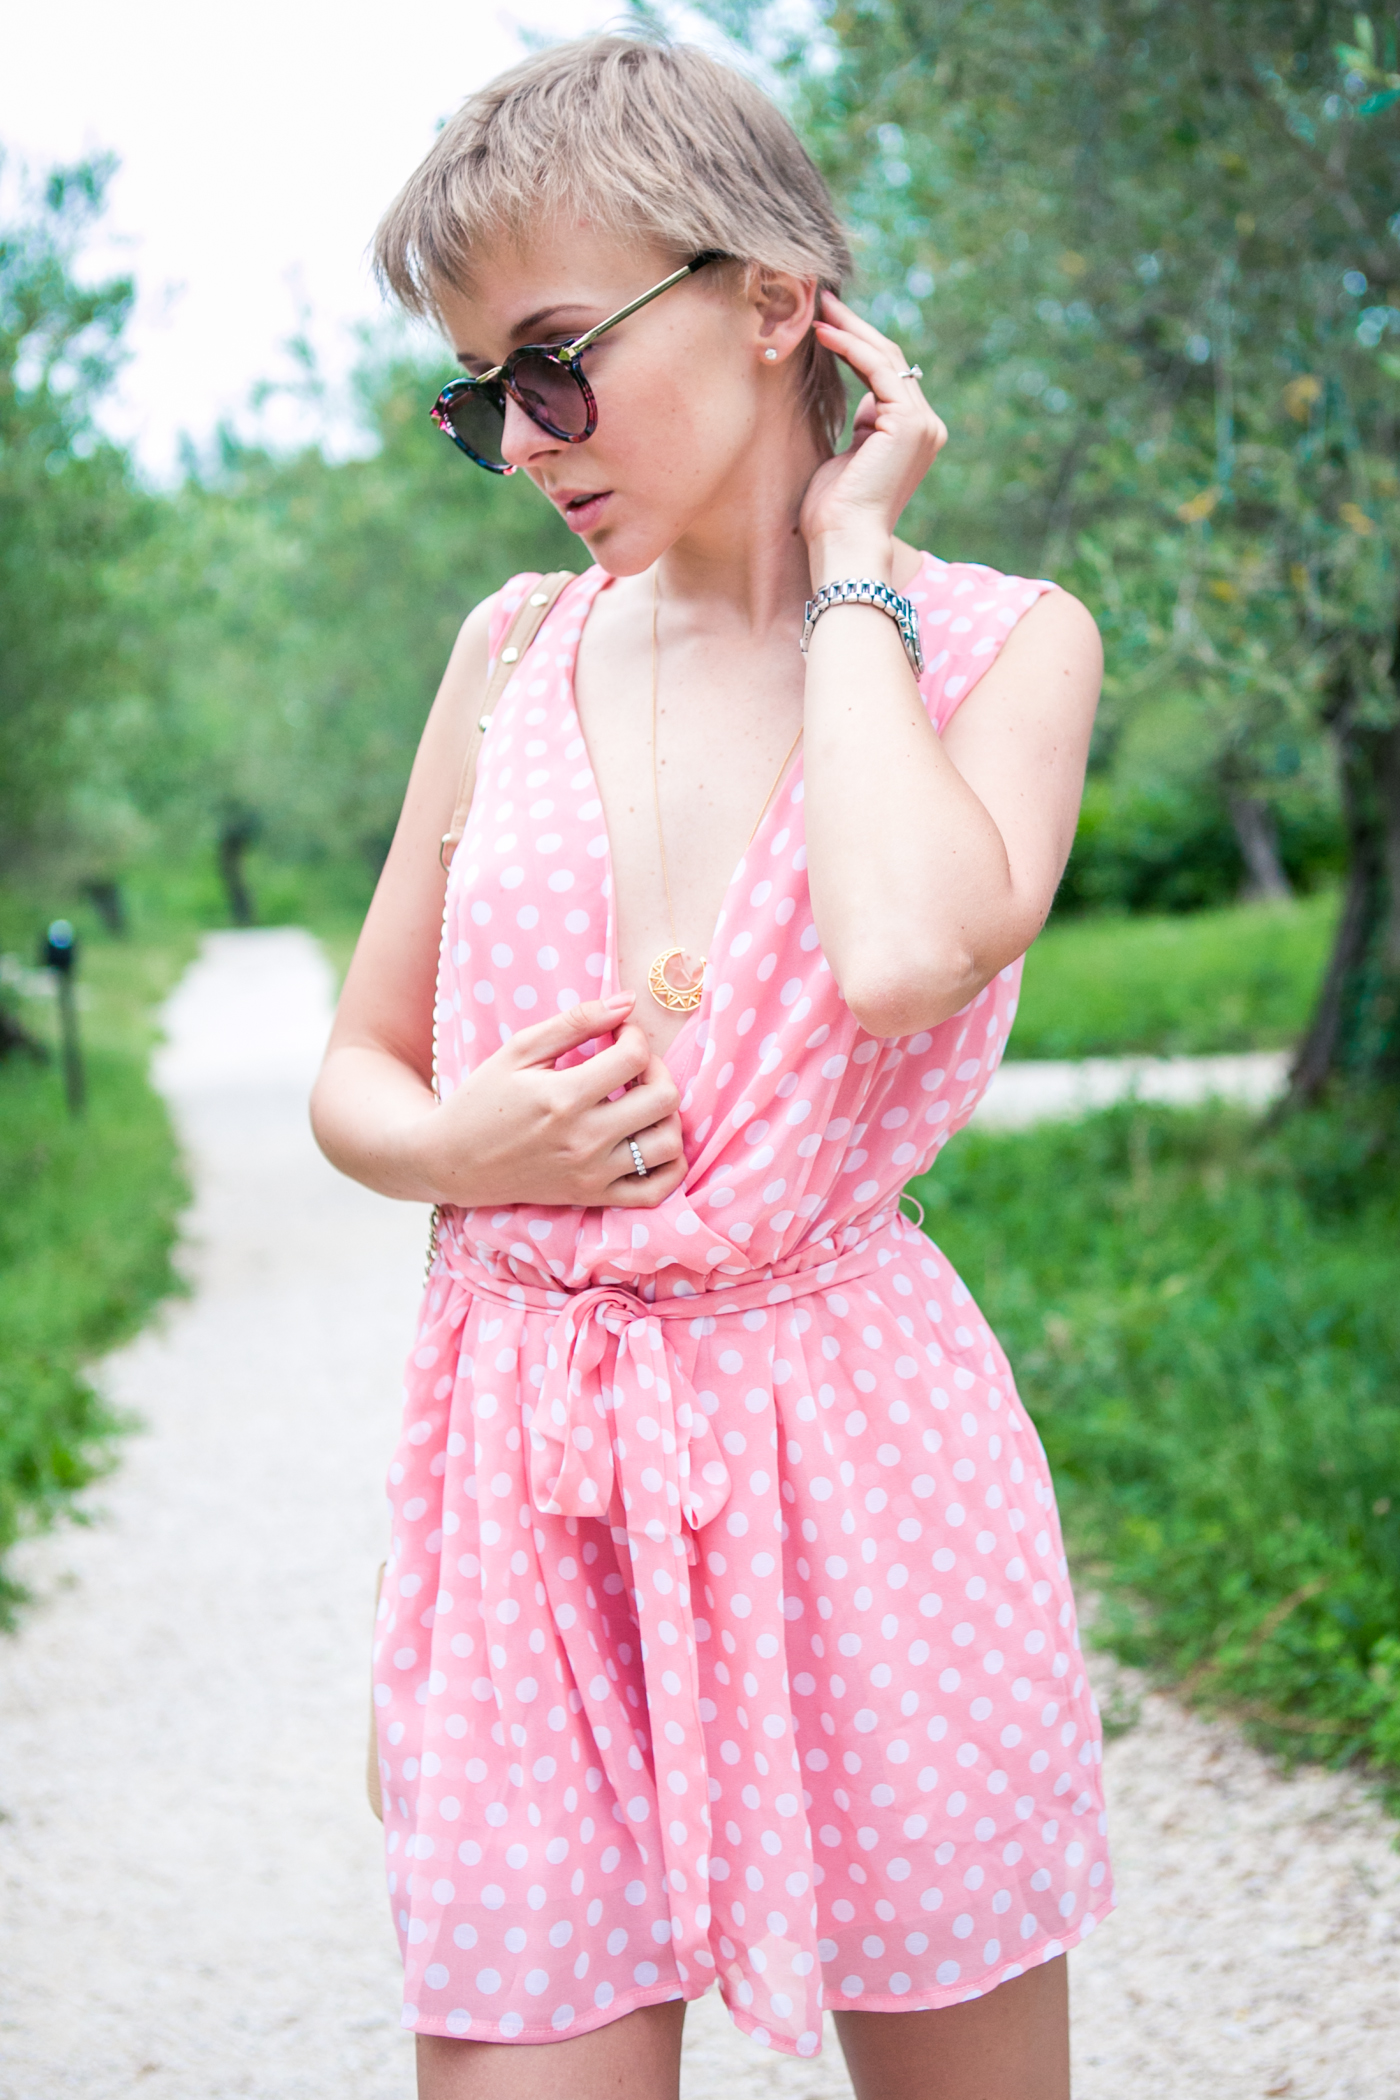 thecablook darya kamalova fashion blog street style sirmione italy verona jumpsuit rompers polka dots pixie cut short hair zanotti sandals rebecca minkoff bag vj style sunnies sunglasses outfit-133